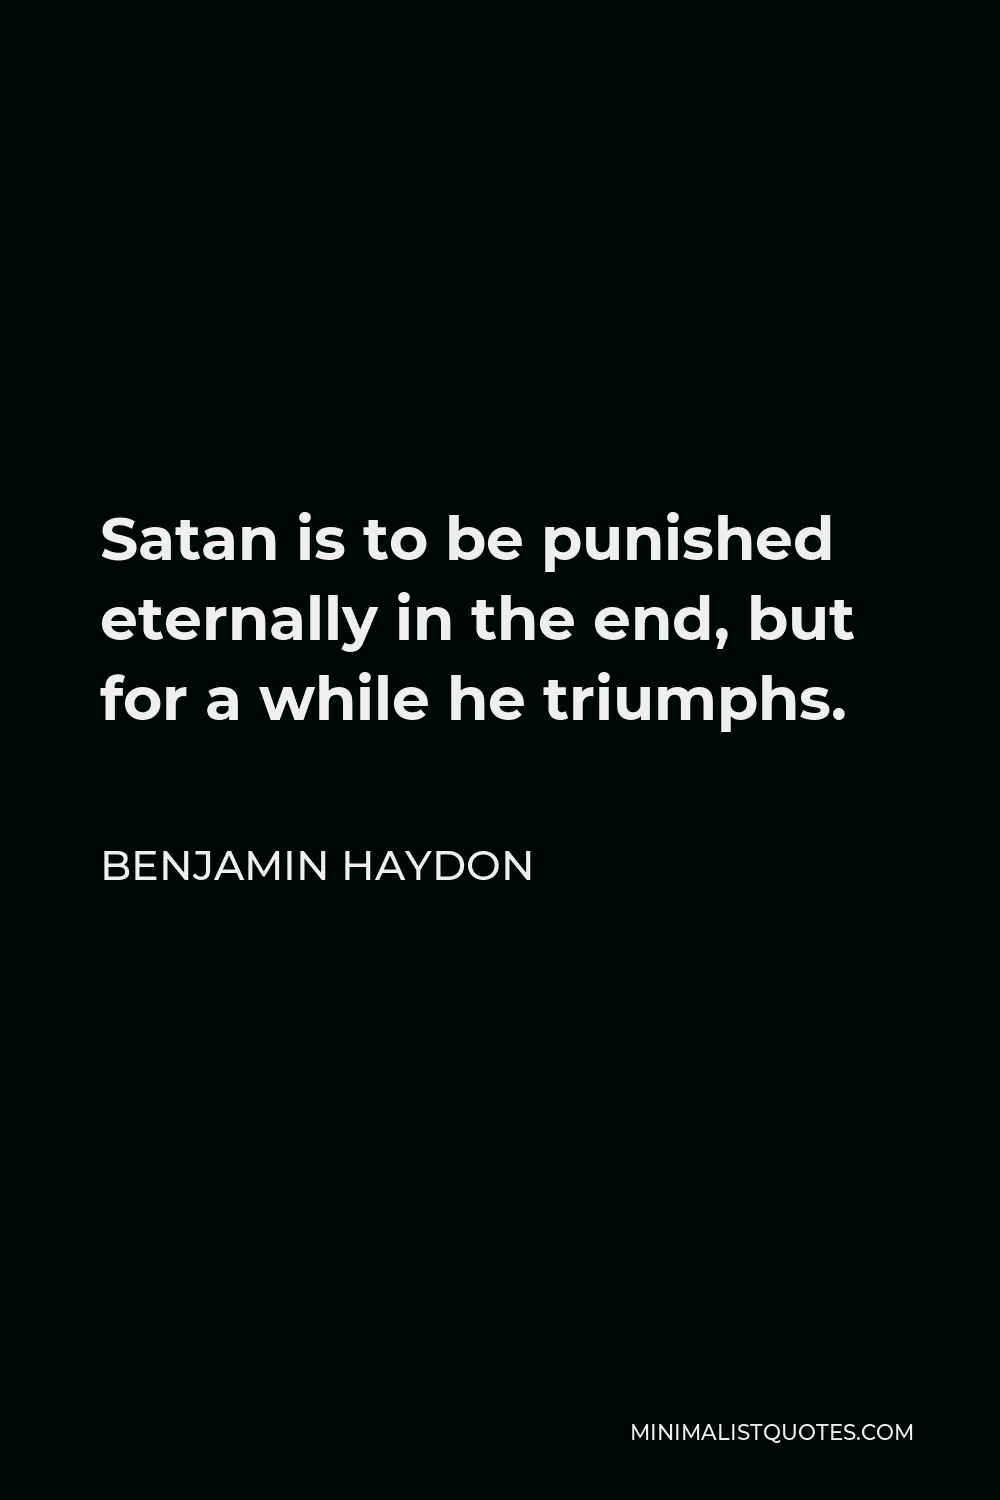 Benjamin Haydon Quote - Satan is to be punished eternally in the end, but for a while he triumphs.